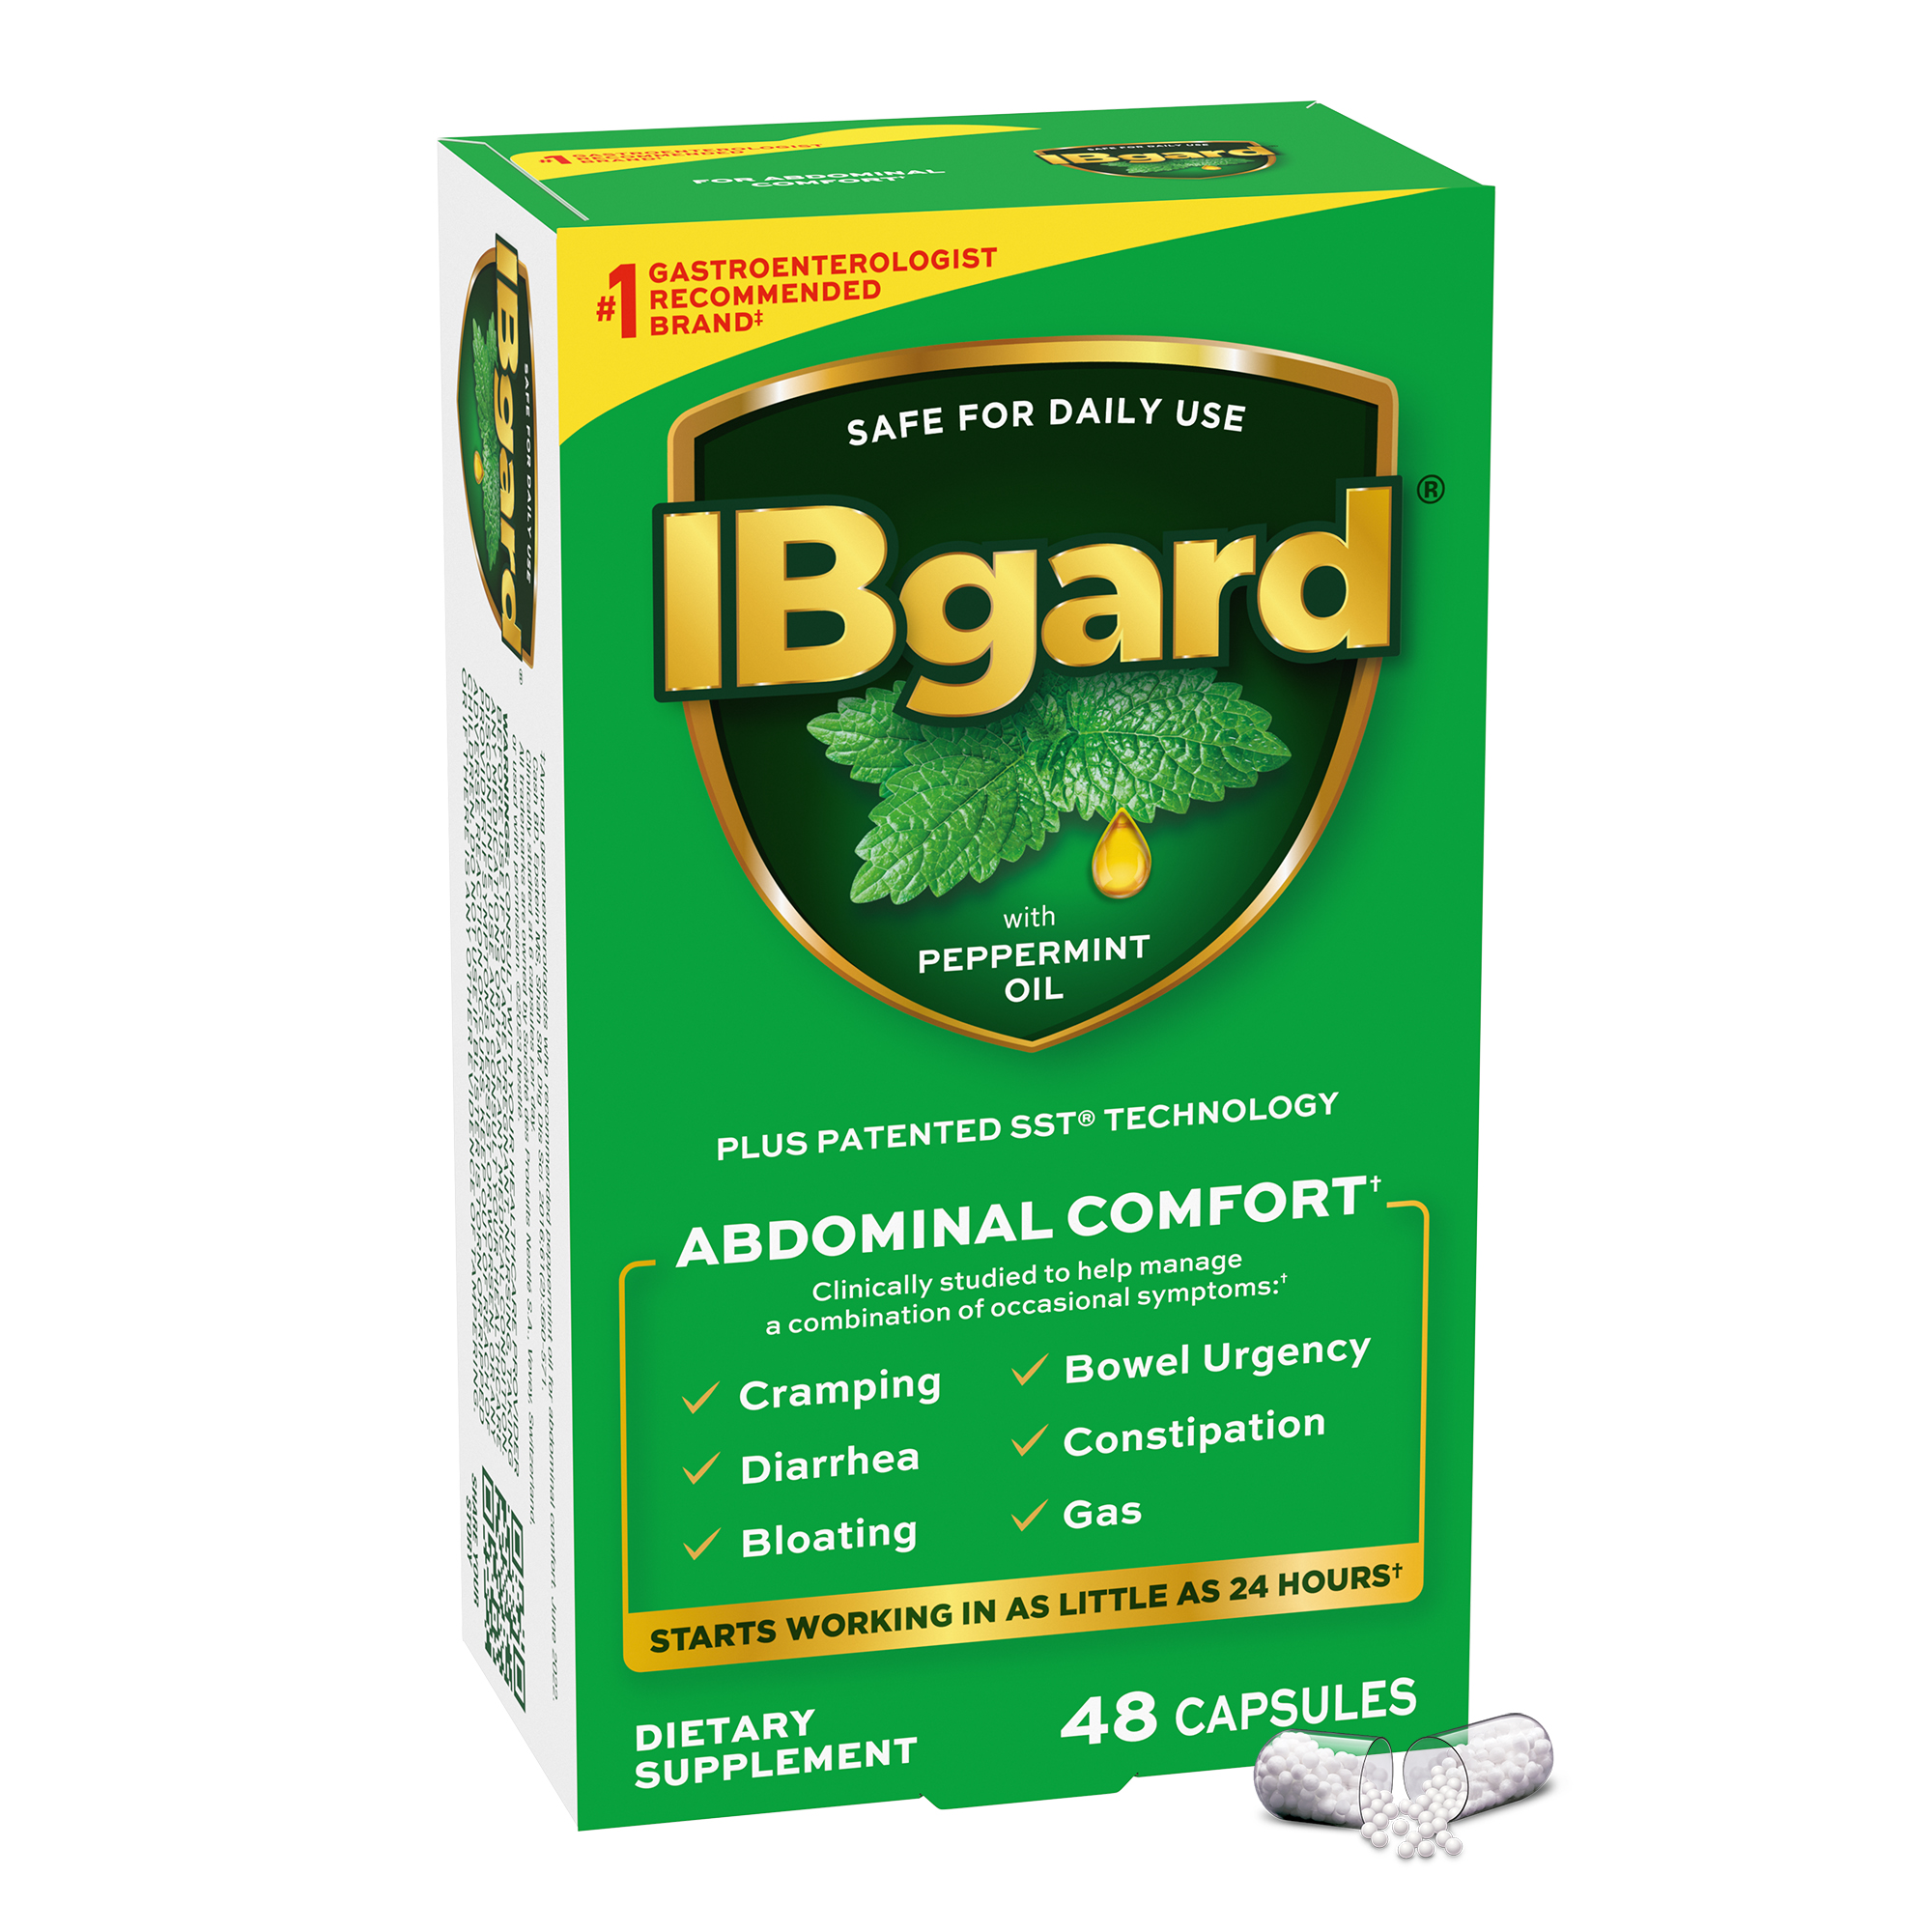 IBgard Digestive Gut Health Supplement for a Combination of Occasional Symptoms: Cramping, Bowel Urgency, Diarrhea, Constipation, Bloating & Gas, 48ct (Packaging May Vary) - image 1 of 9